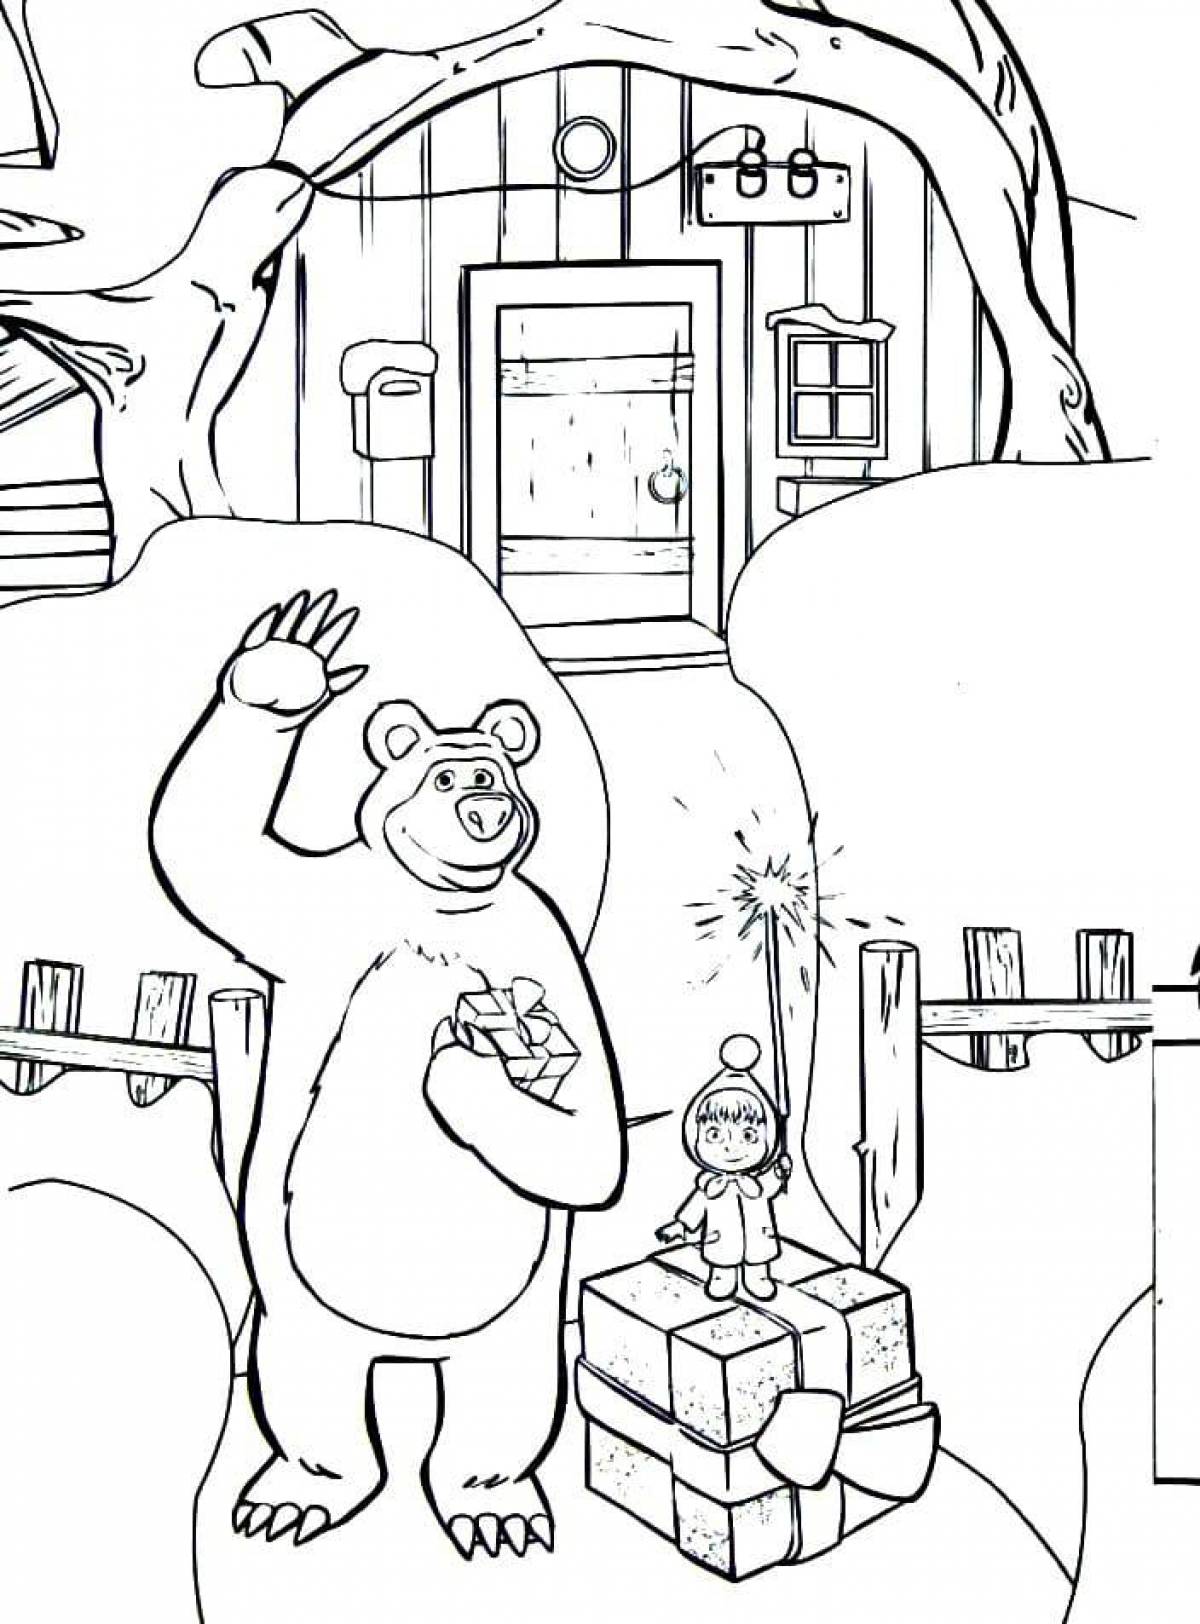 Merry Masha and the Bear coloring pages for kids